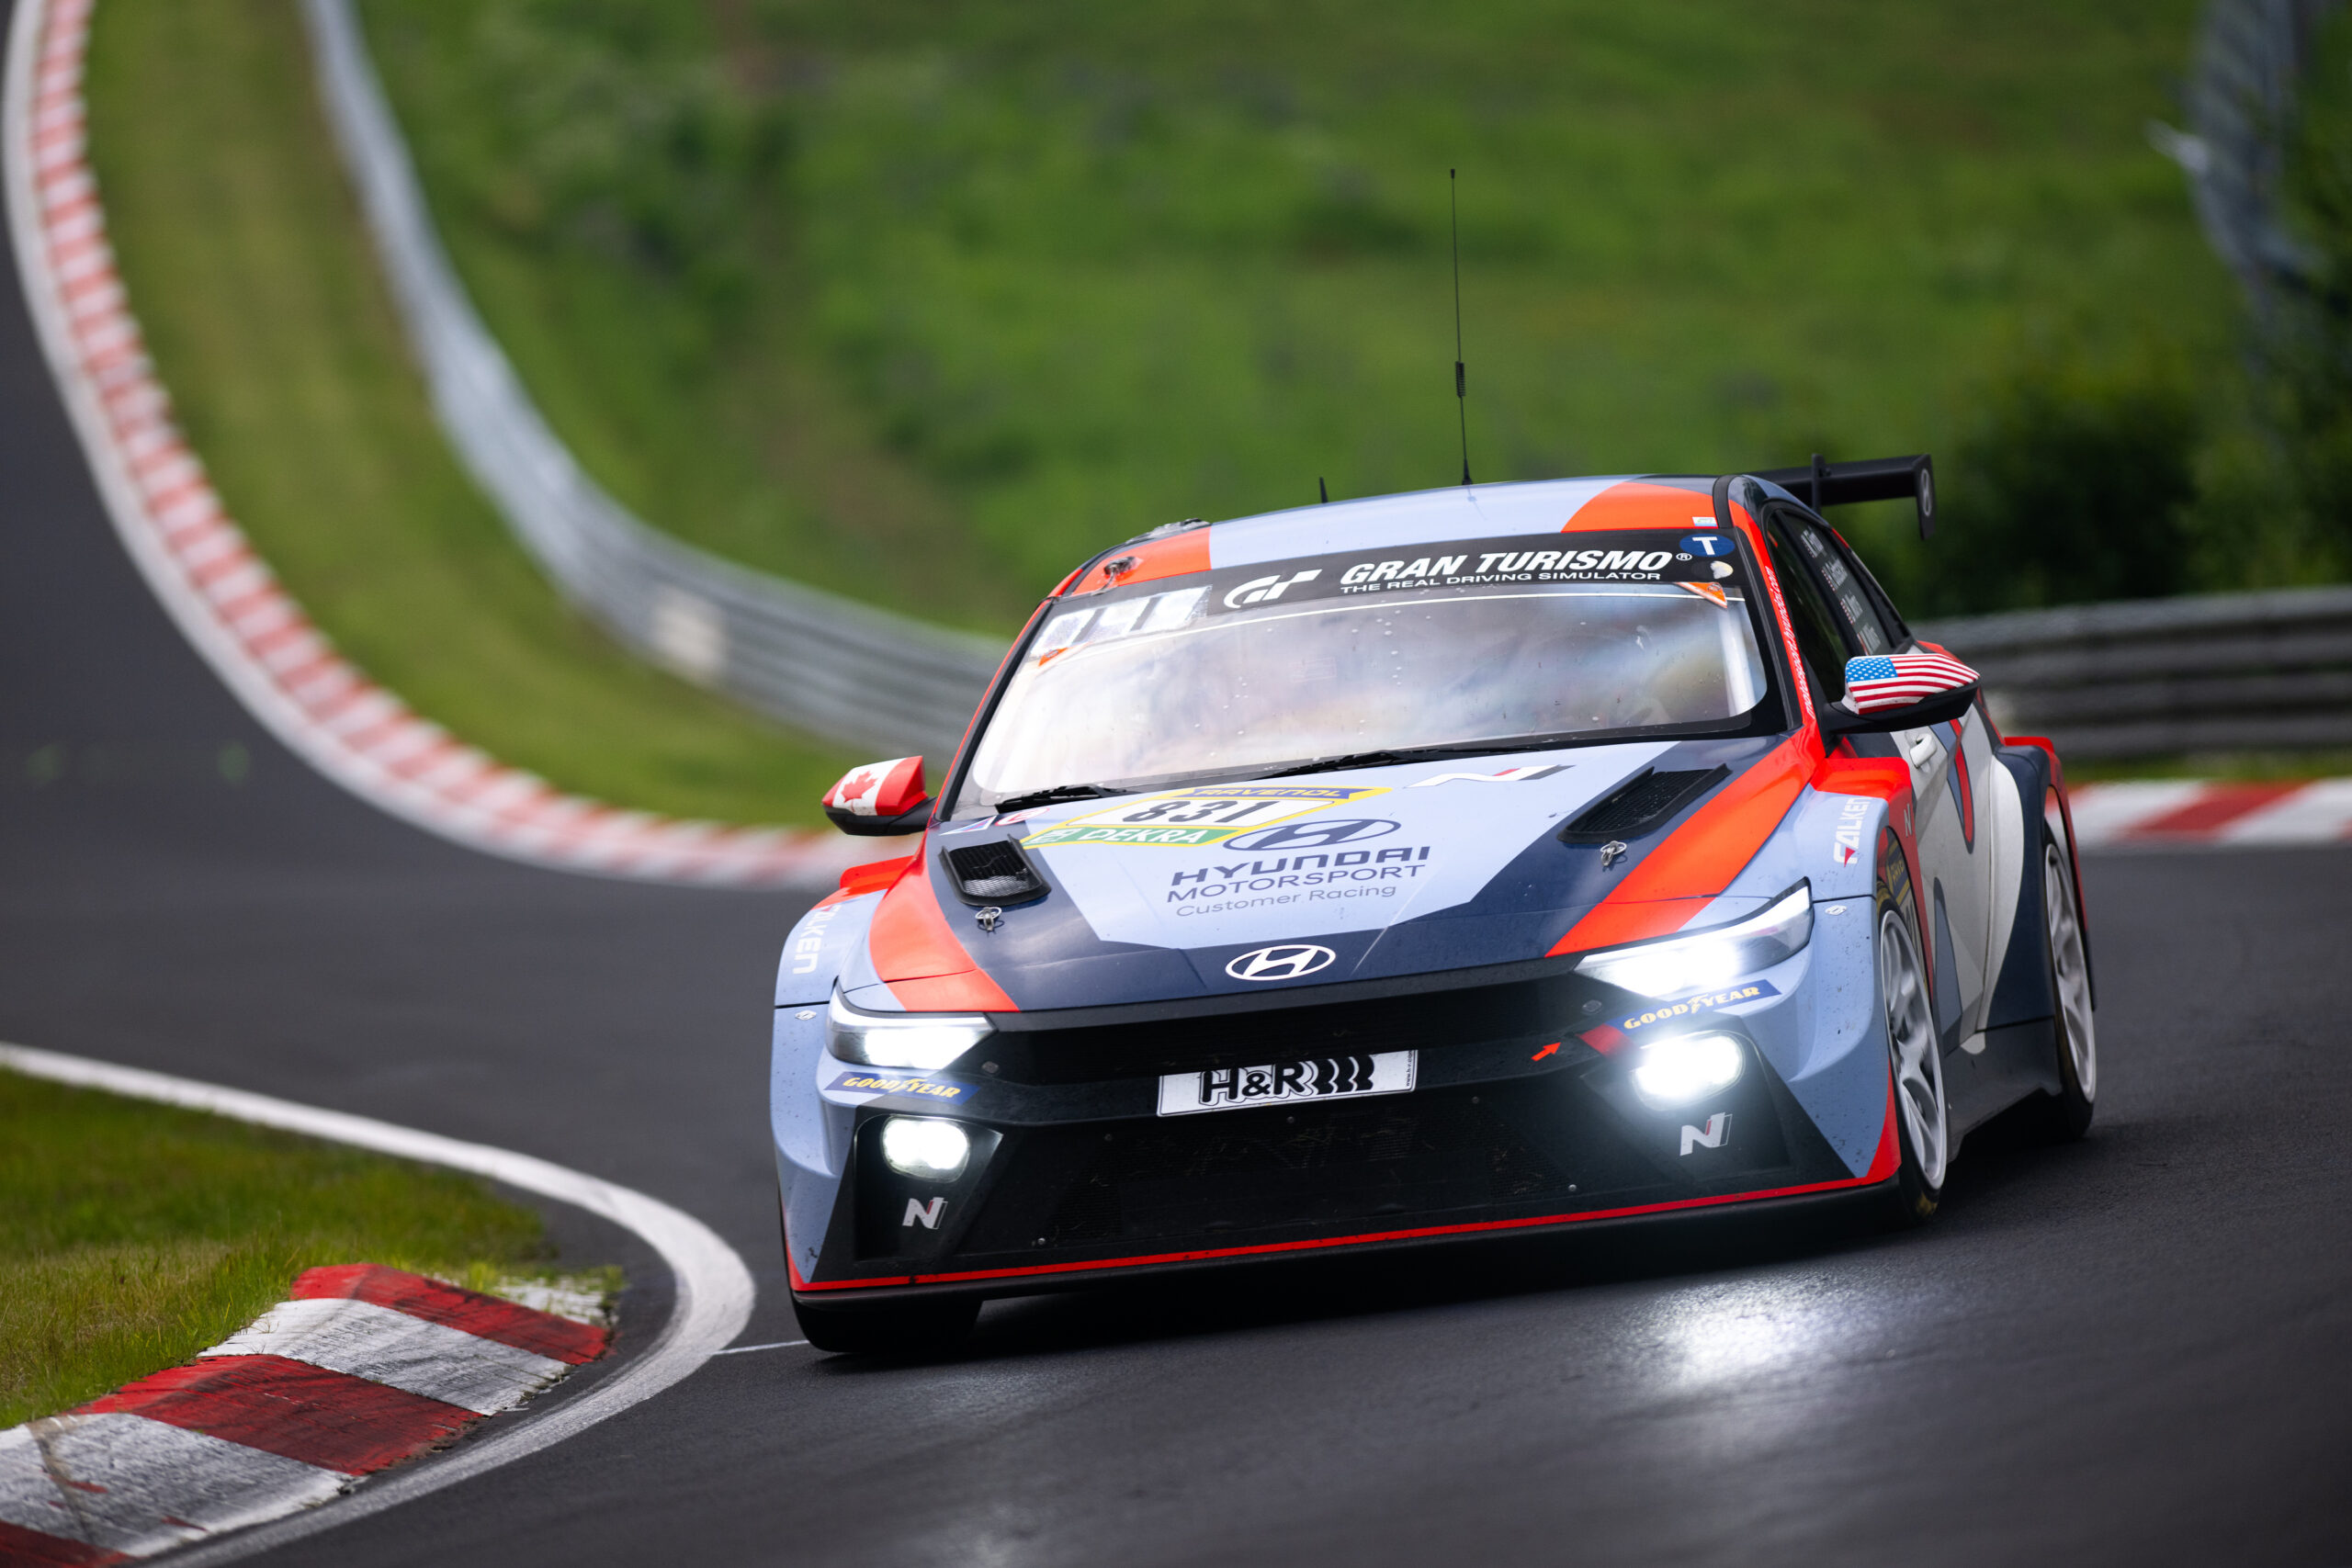 The Hyundai Elantra N TCR secured its fourth consecutive TCR class victory at the Nürburgring 24 Hours, overcoming severe fog and a 14-hour red flag, achieving a historic 1-2-3 finish.